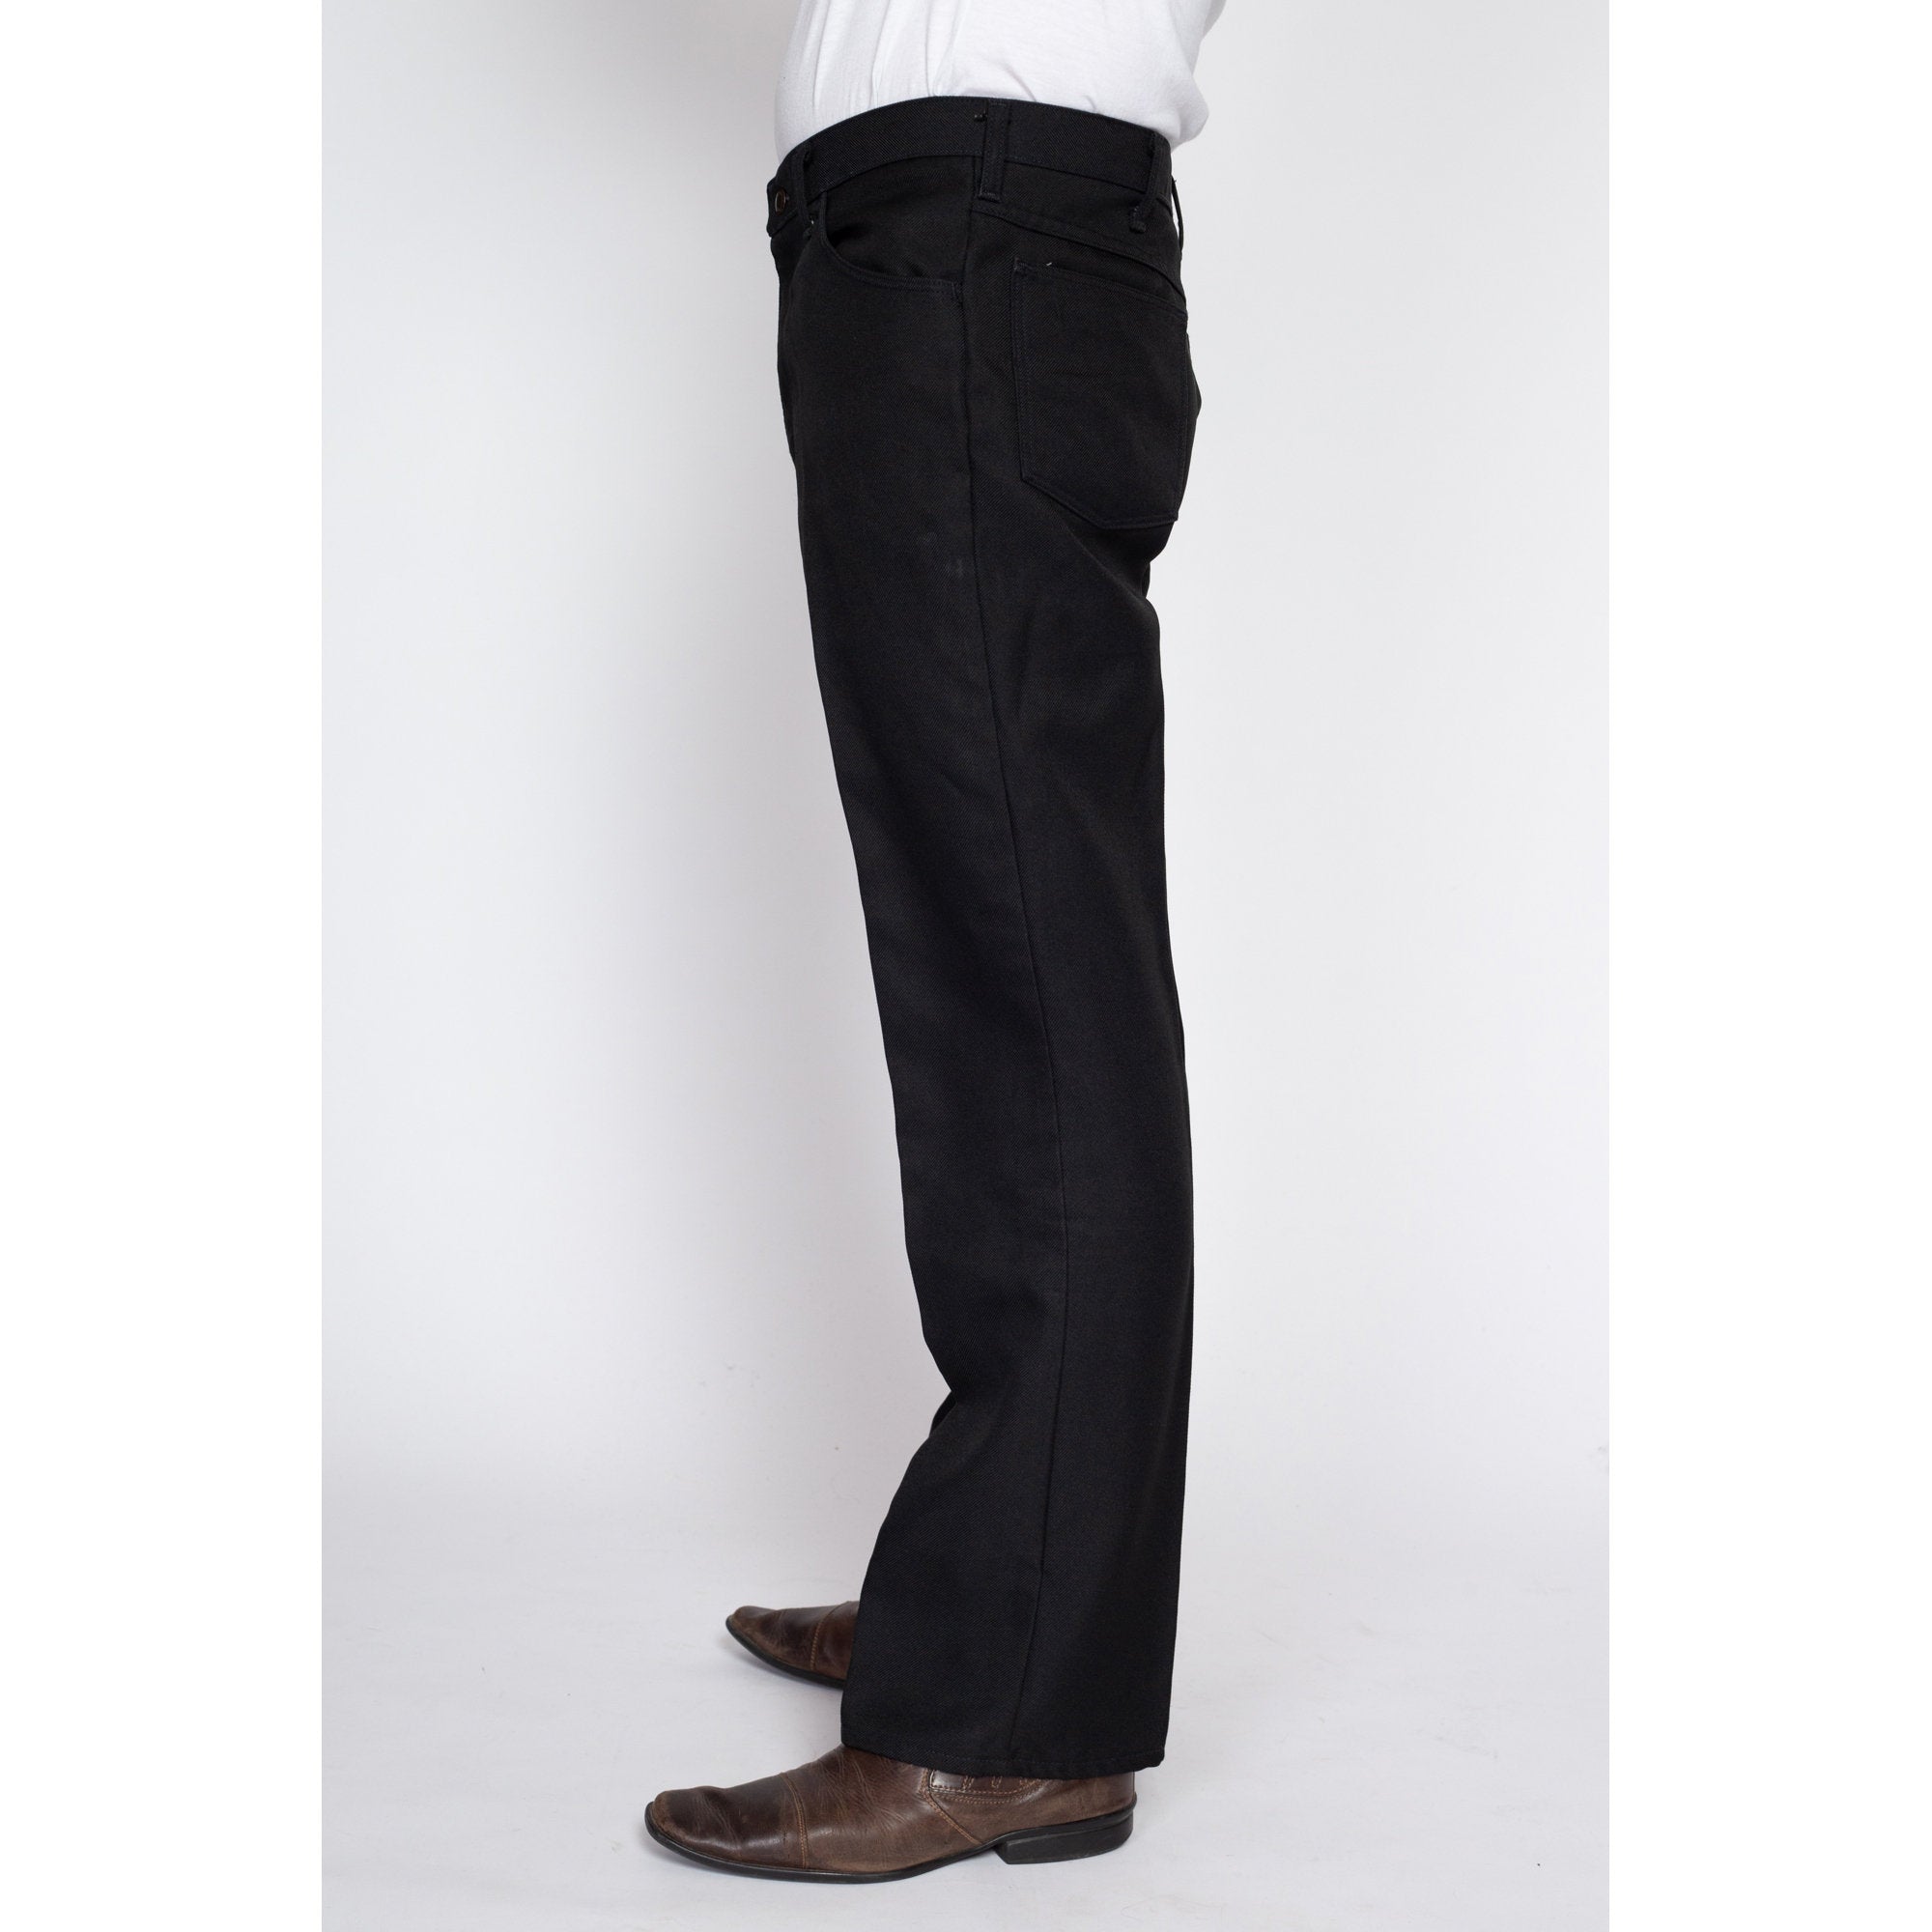 Jeans & Trousers | Mens Wrangler Jeans | Freeup